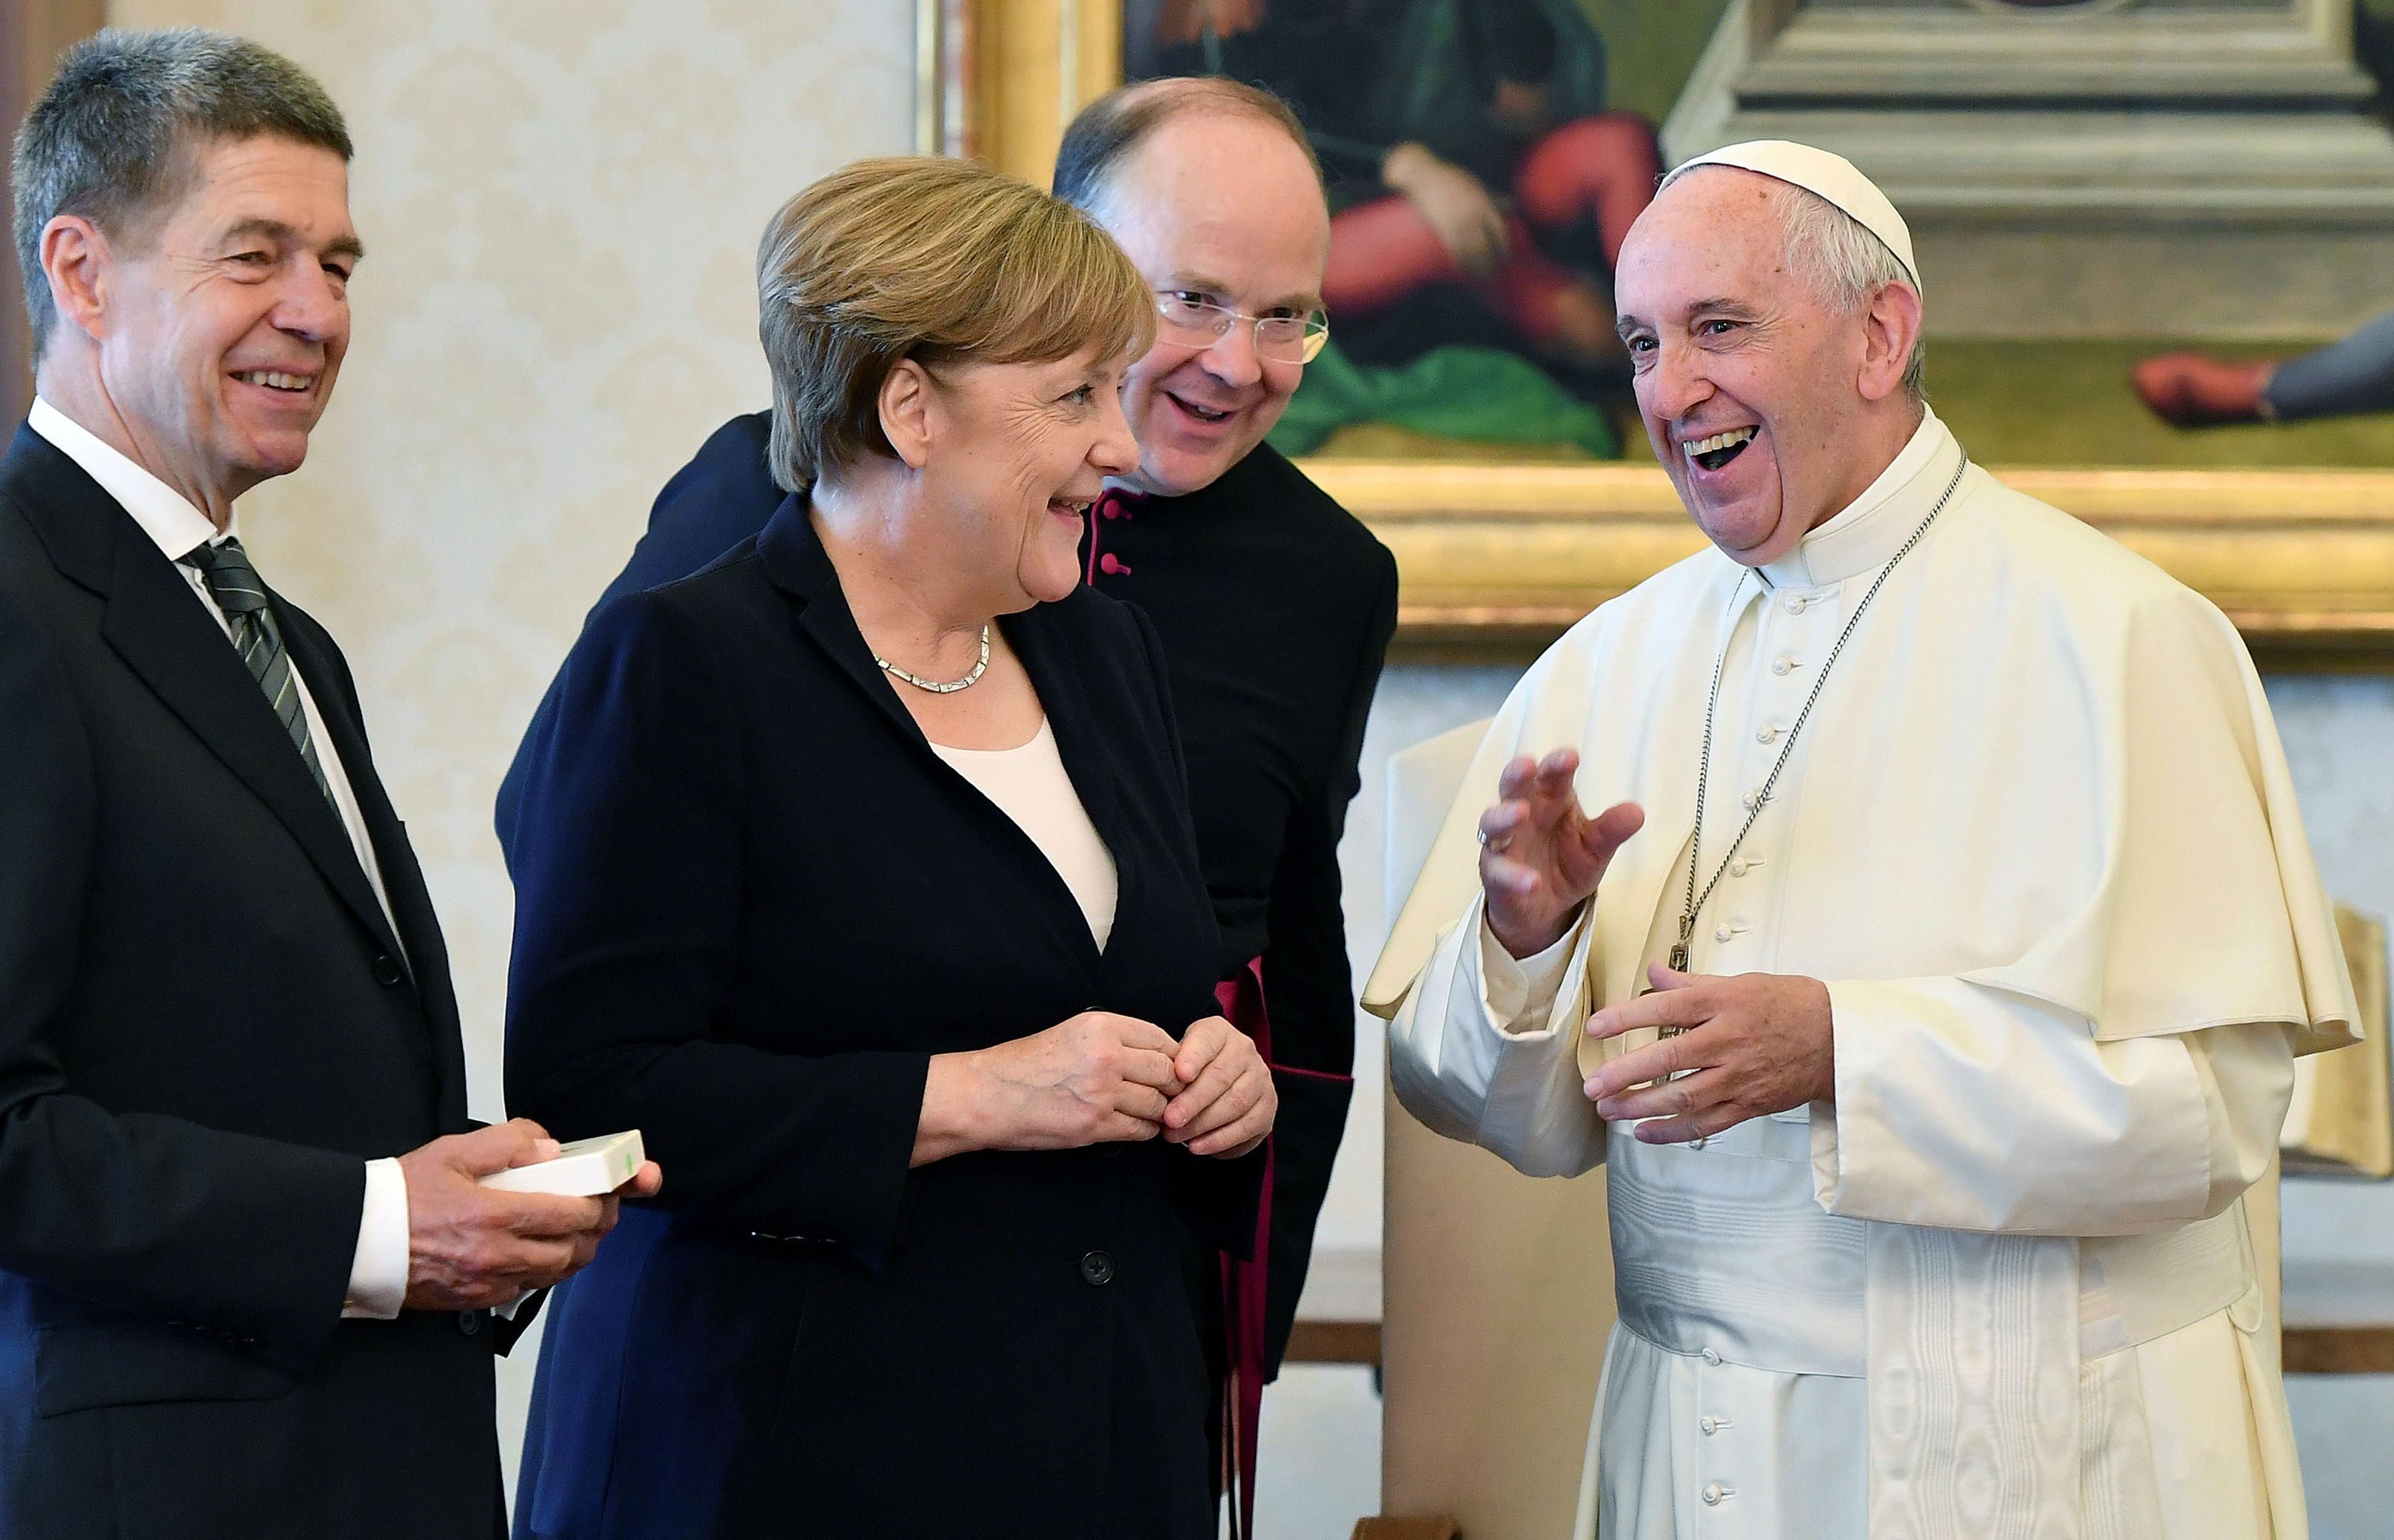 Pope urges Merkel to continue supporting Paris climate agreement